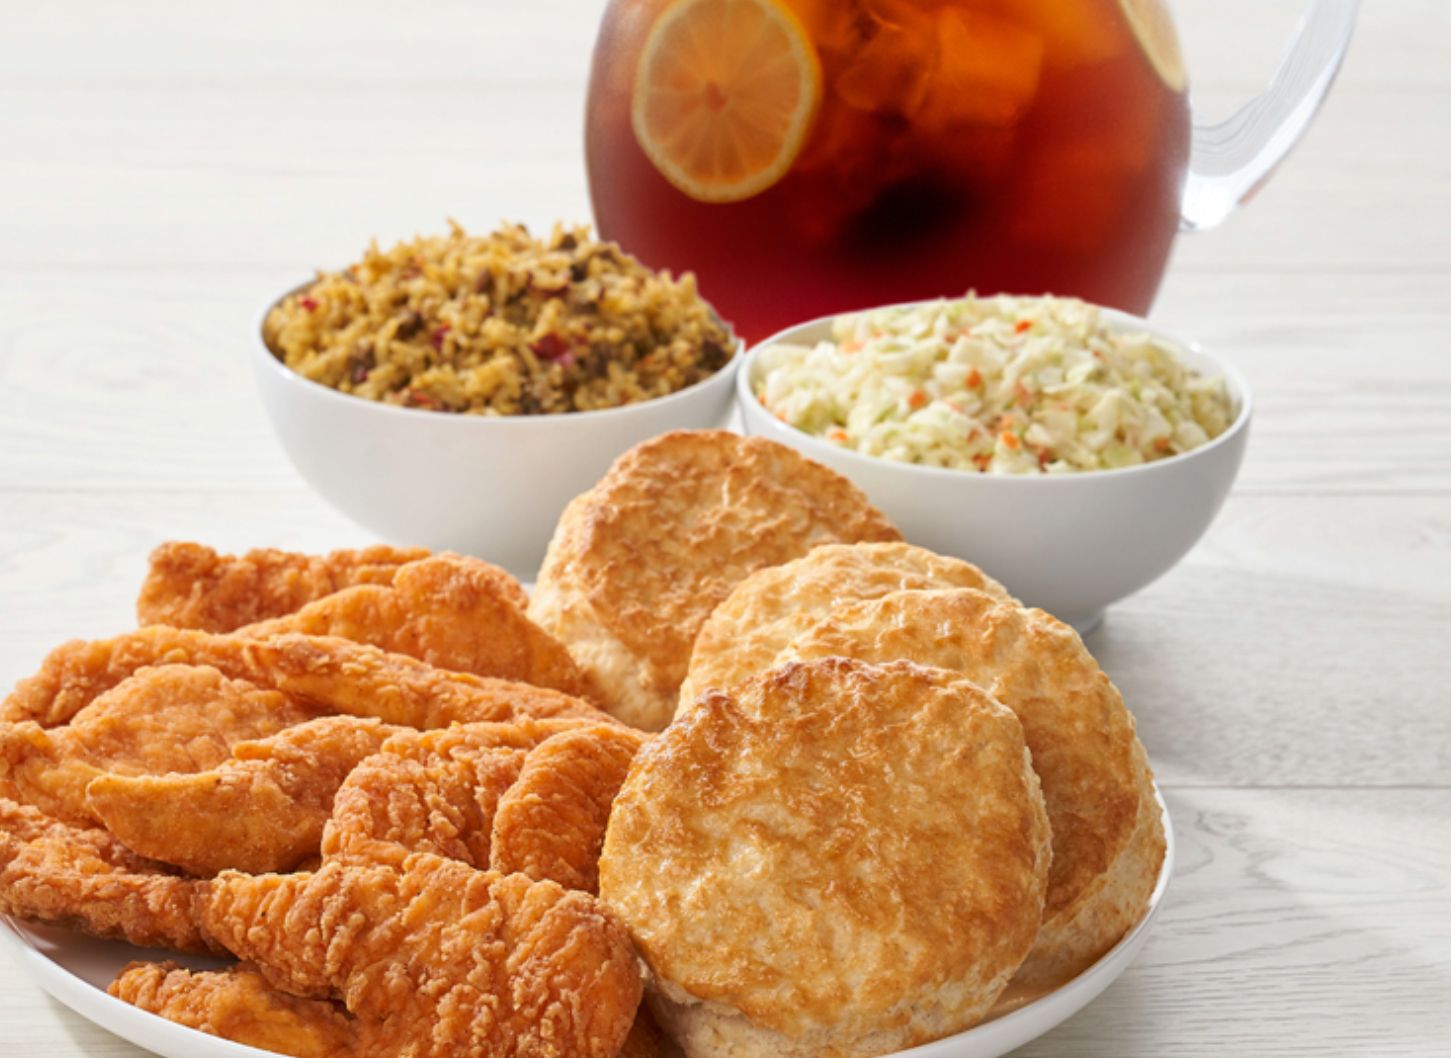 Select Bojangles Restaurants are Offering the New $19.99 12 Piece Chicken Supremes Family Meal